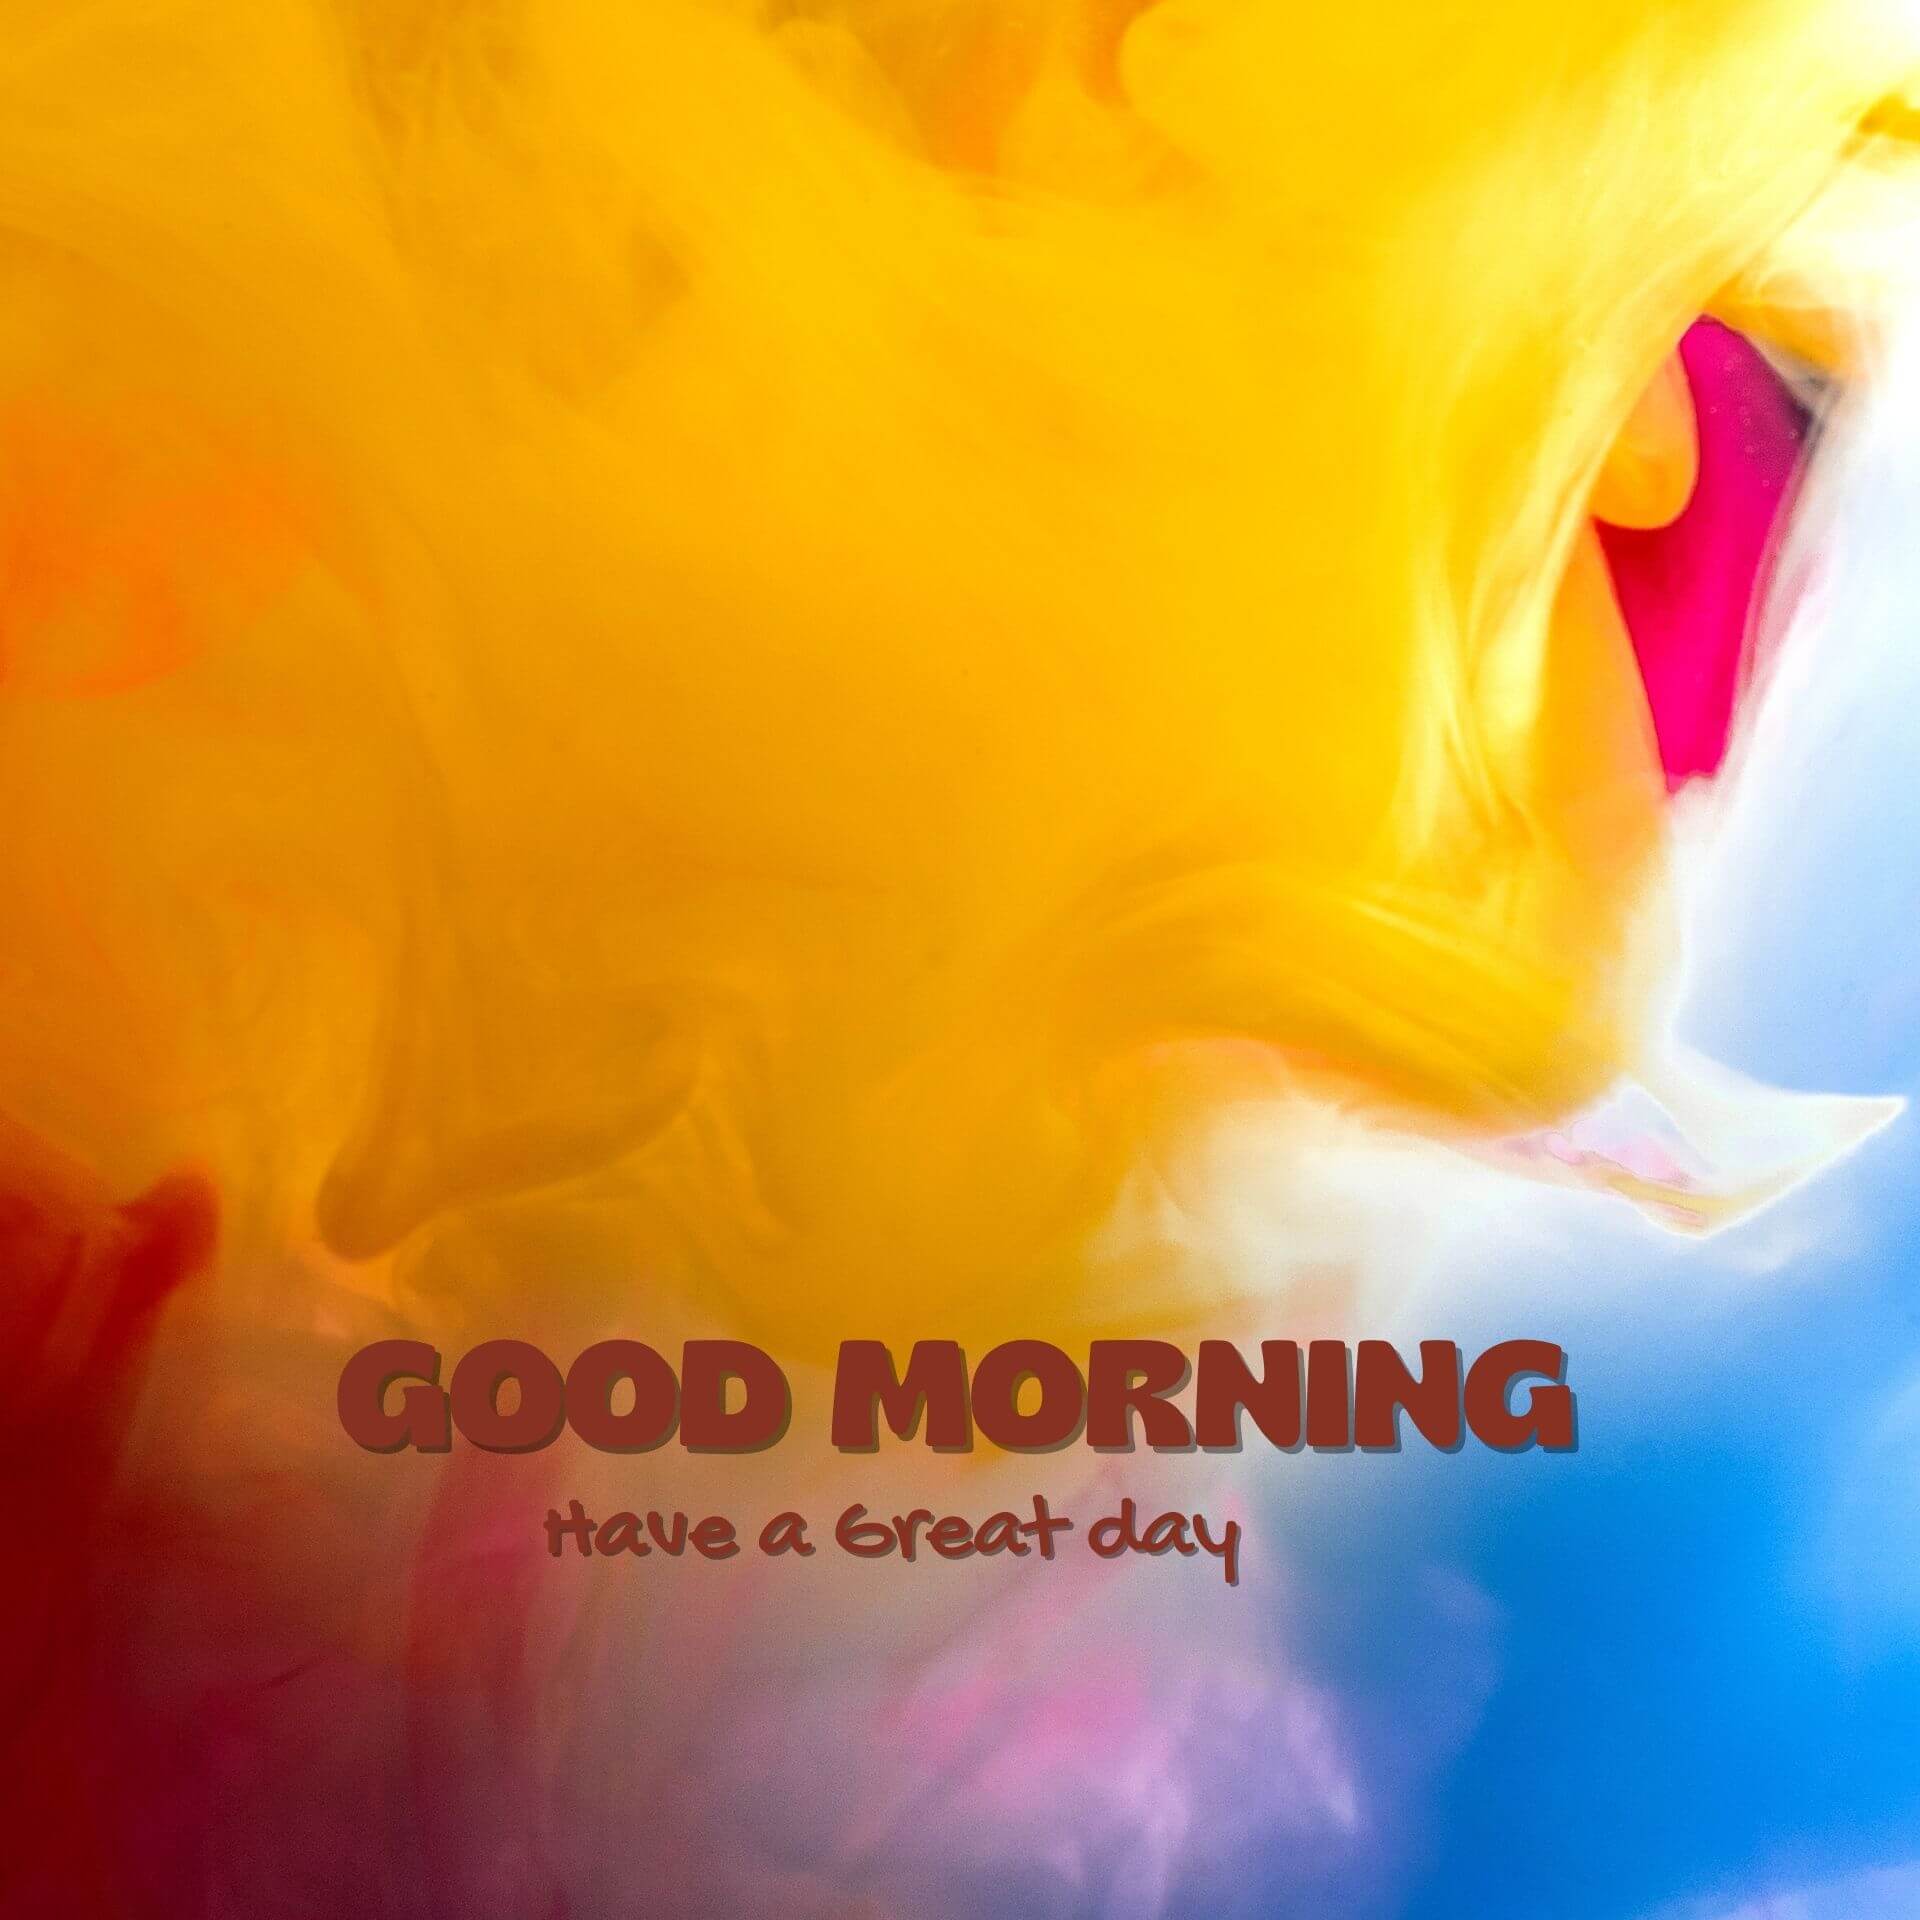 Good morning have a nice day Wallpaper pics New Download 2